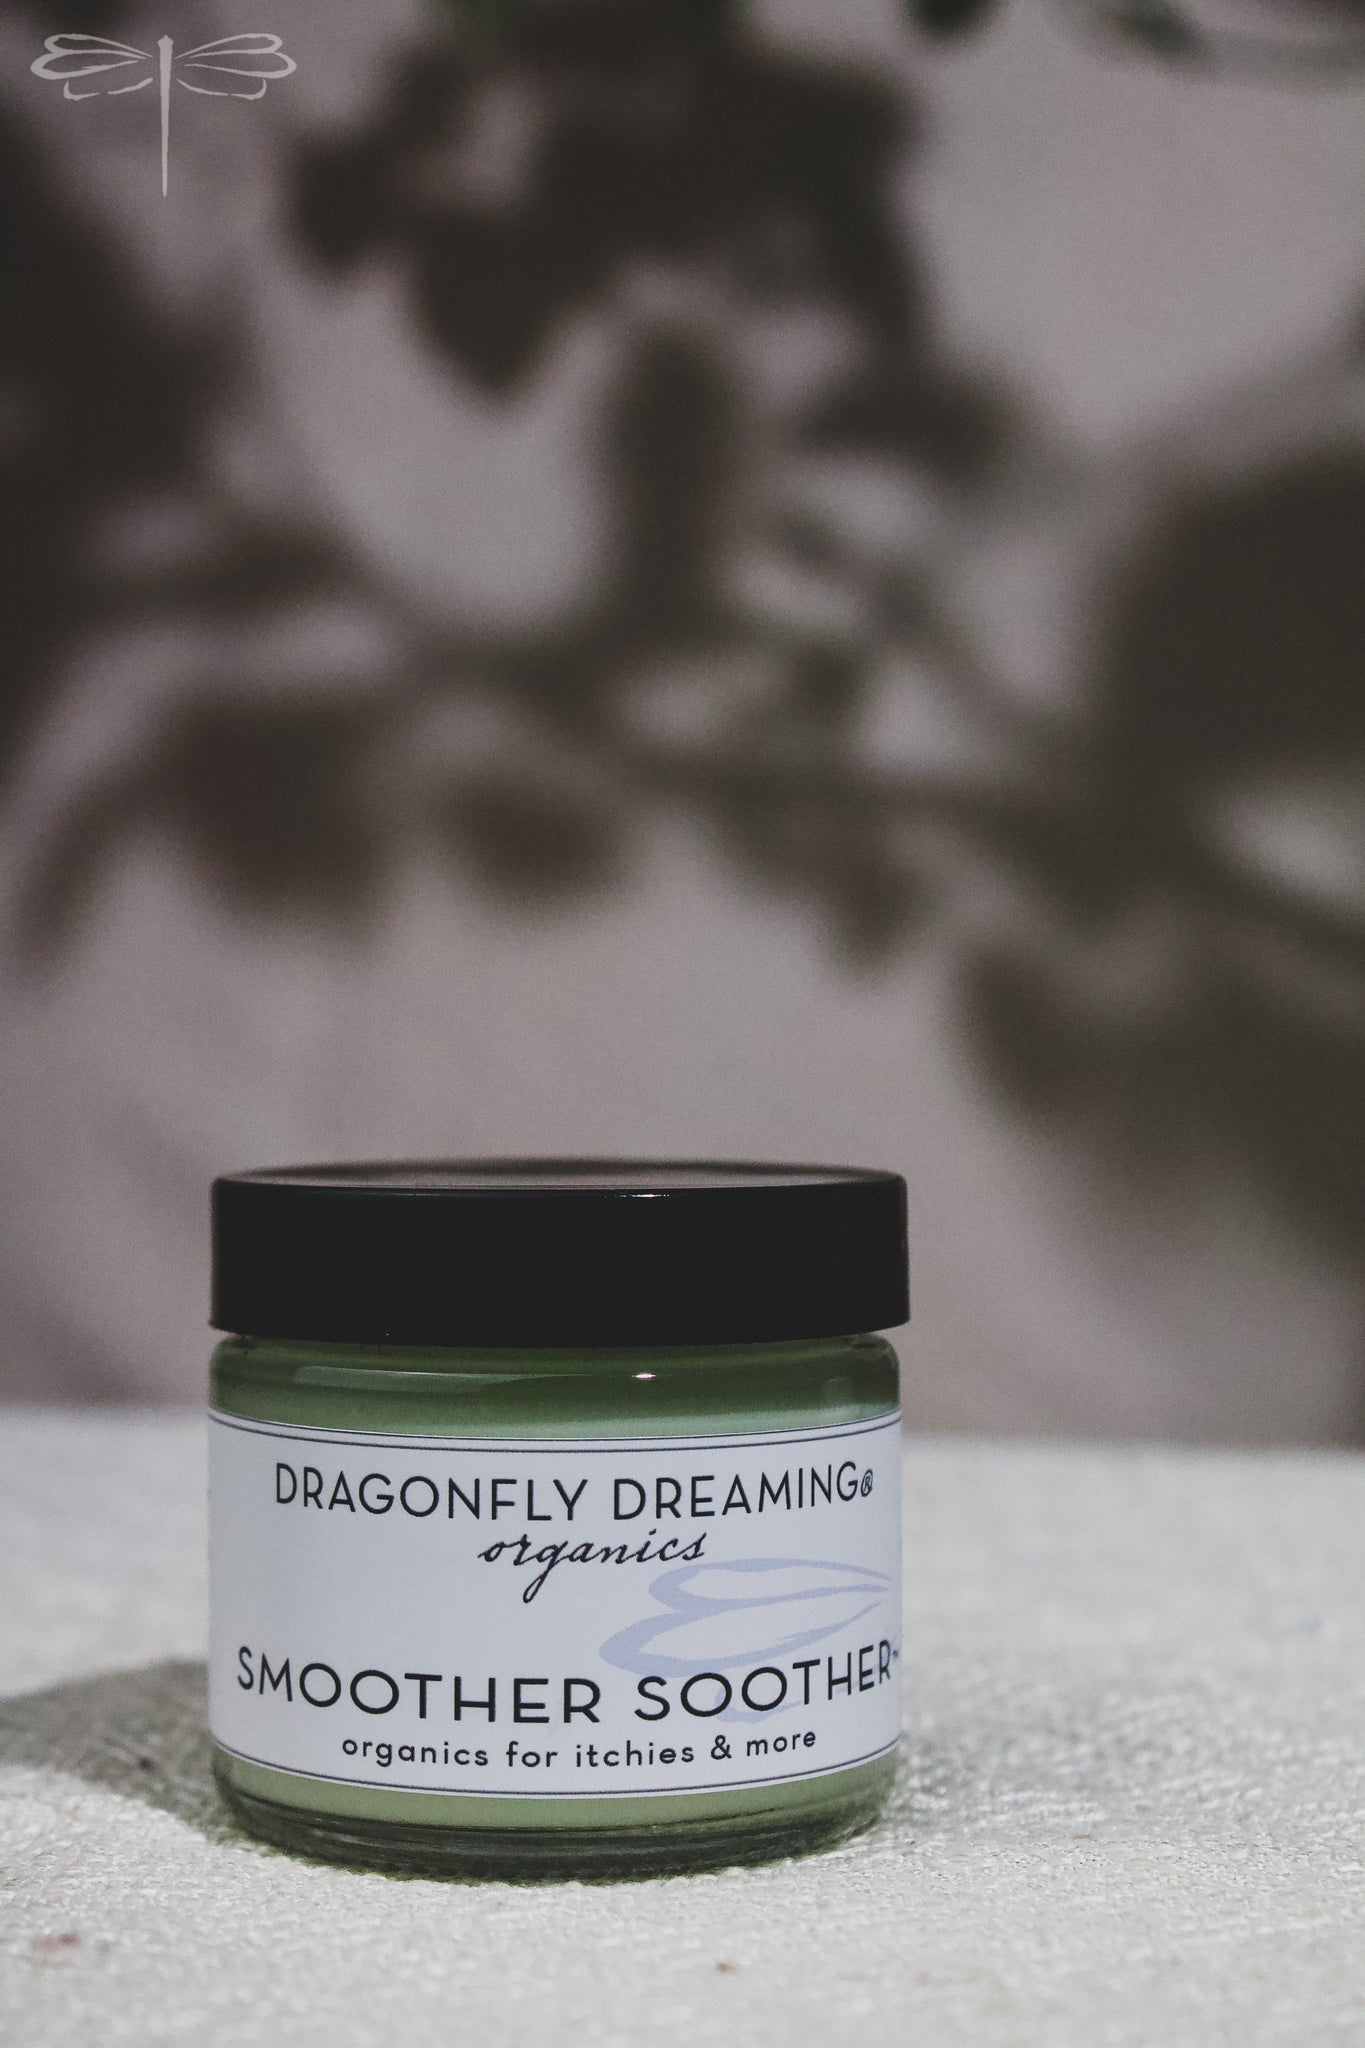 Smoother Soother™ Skin Calming Creme by Dragonfly Dreaming Organics